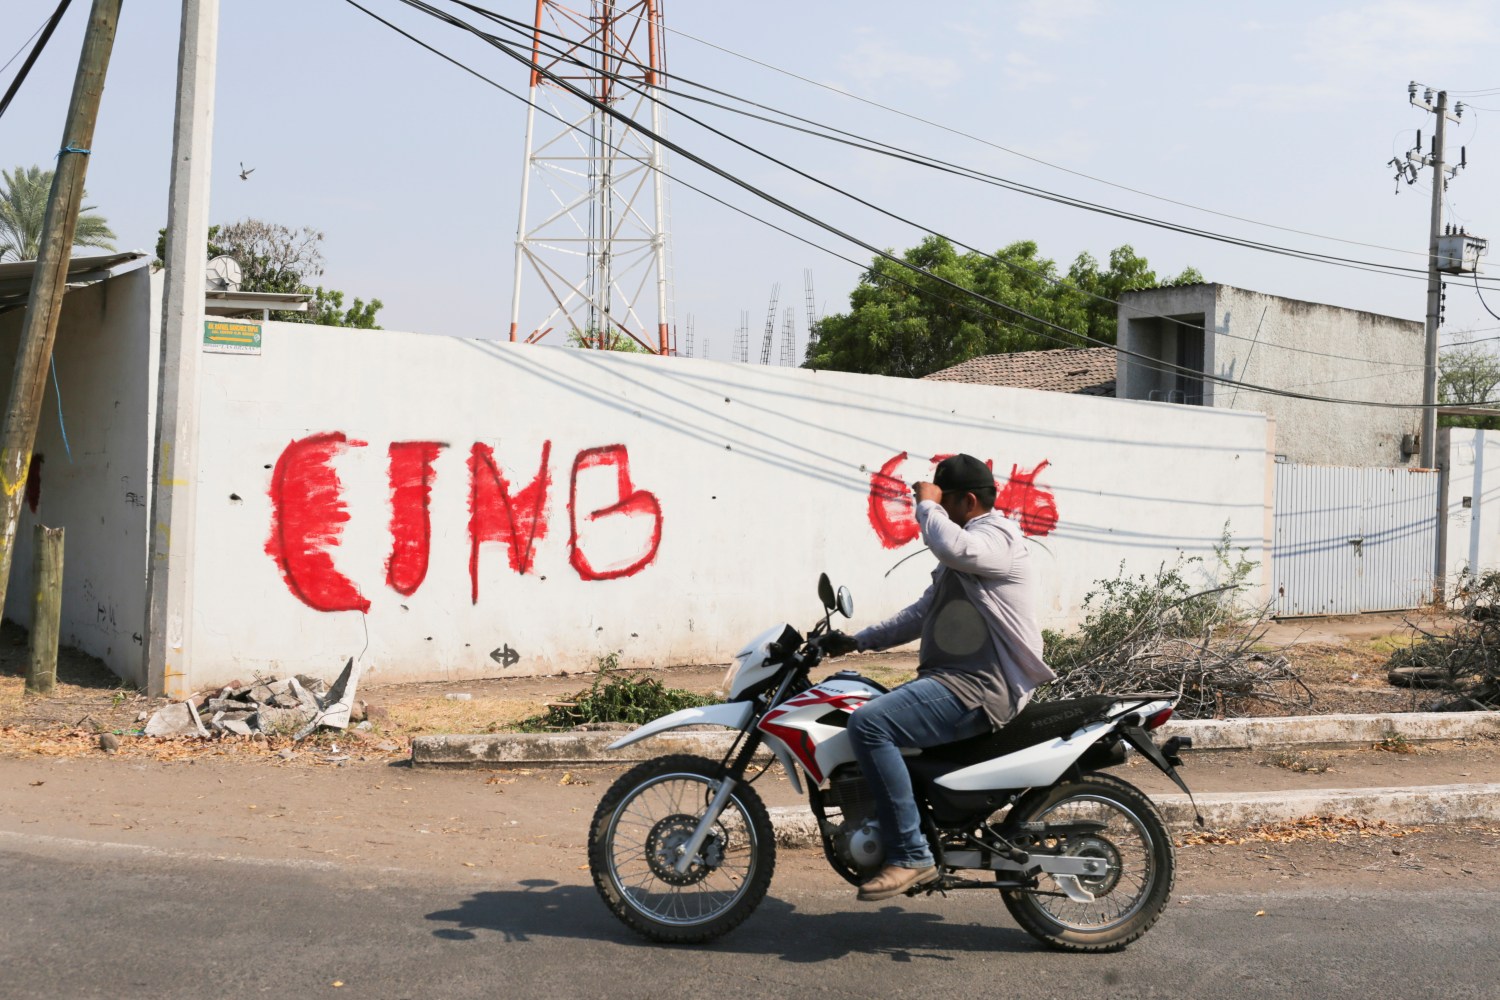 A motorist passes by a wall with a graffiti of the Jalisco New Generation Cartel (CJNG) in El Aguaje after the visit of Vatican's ambassador to Mexico Franco Coppola to the area and to the municipality of Aguililla, an area where the Jalisco New Generation Cartel (CJNG) and local drug gangs are fighting to control the territory, in Michoacan state, Mexico April 23, 2021. REUTERS/Alan Ortega